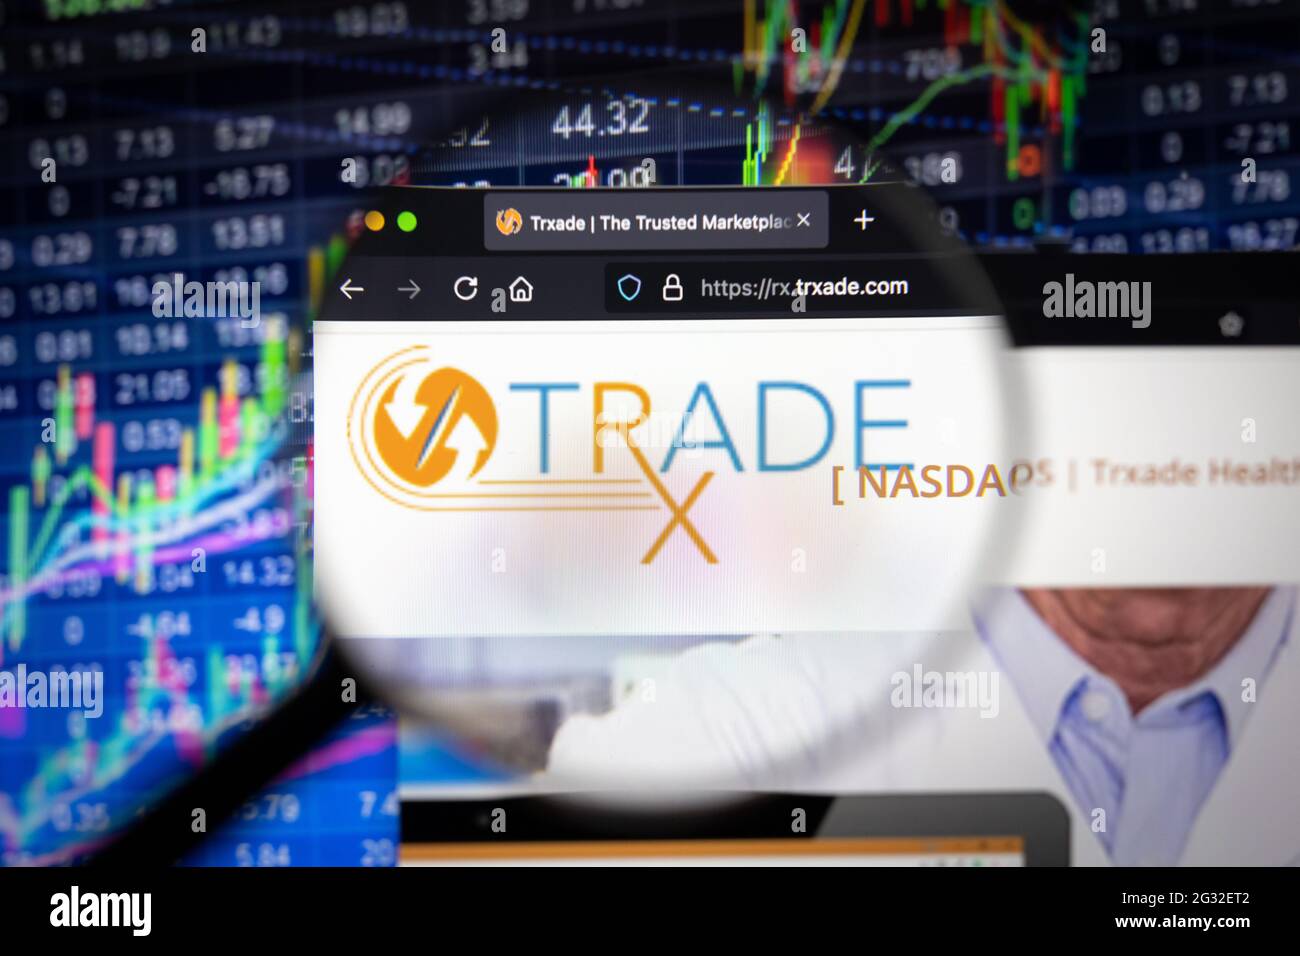 Trxade company logo on a website with blurry stock market developments in the background, seen on a computer screen through a magnifying glass Stock Photo